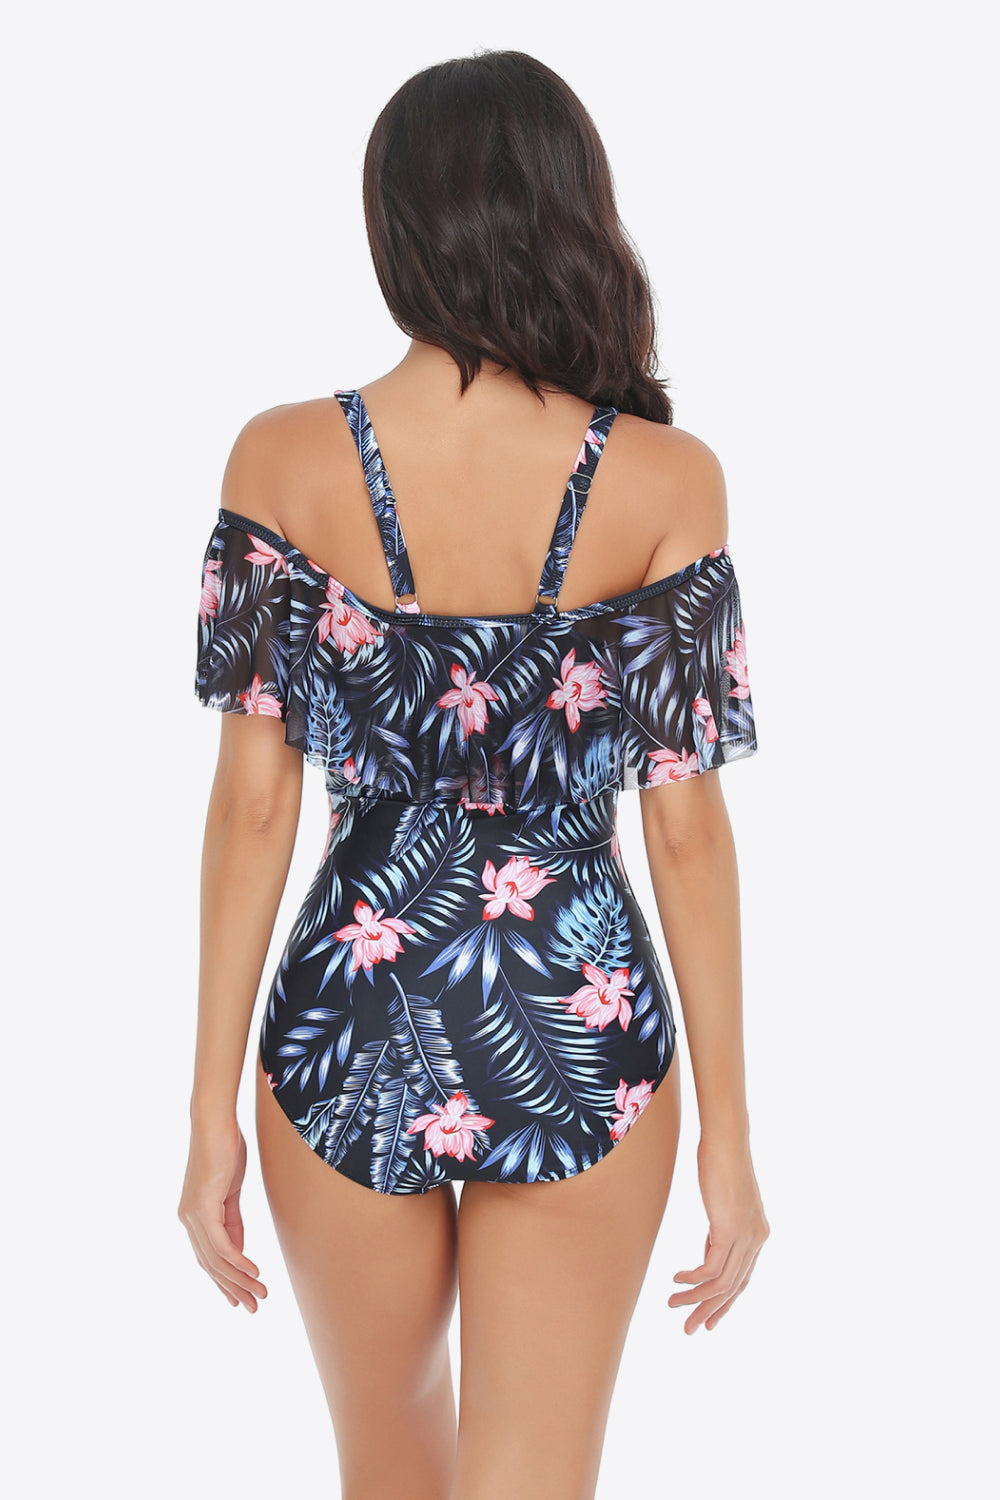 Botanical Print Cold-Shoulder Layered One-Piece Swimsuit - Women’s Clothing & Accessories - Swimwear - 2 - 2024